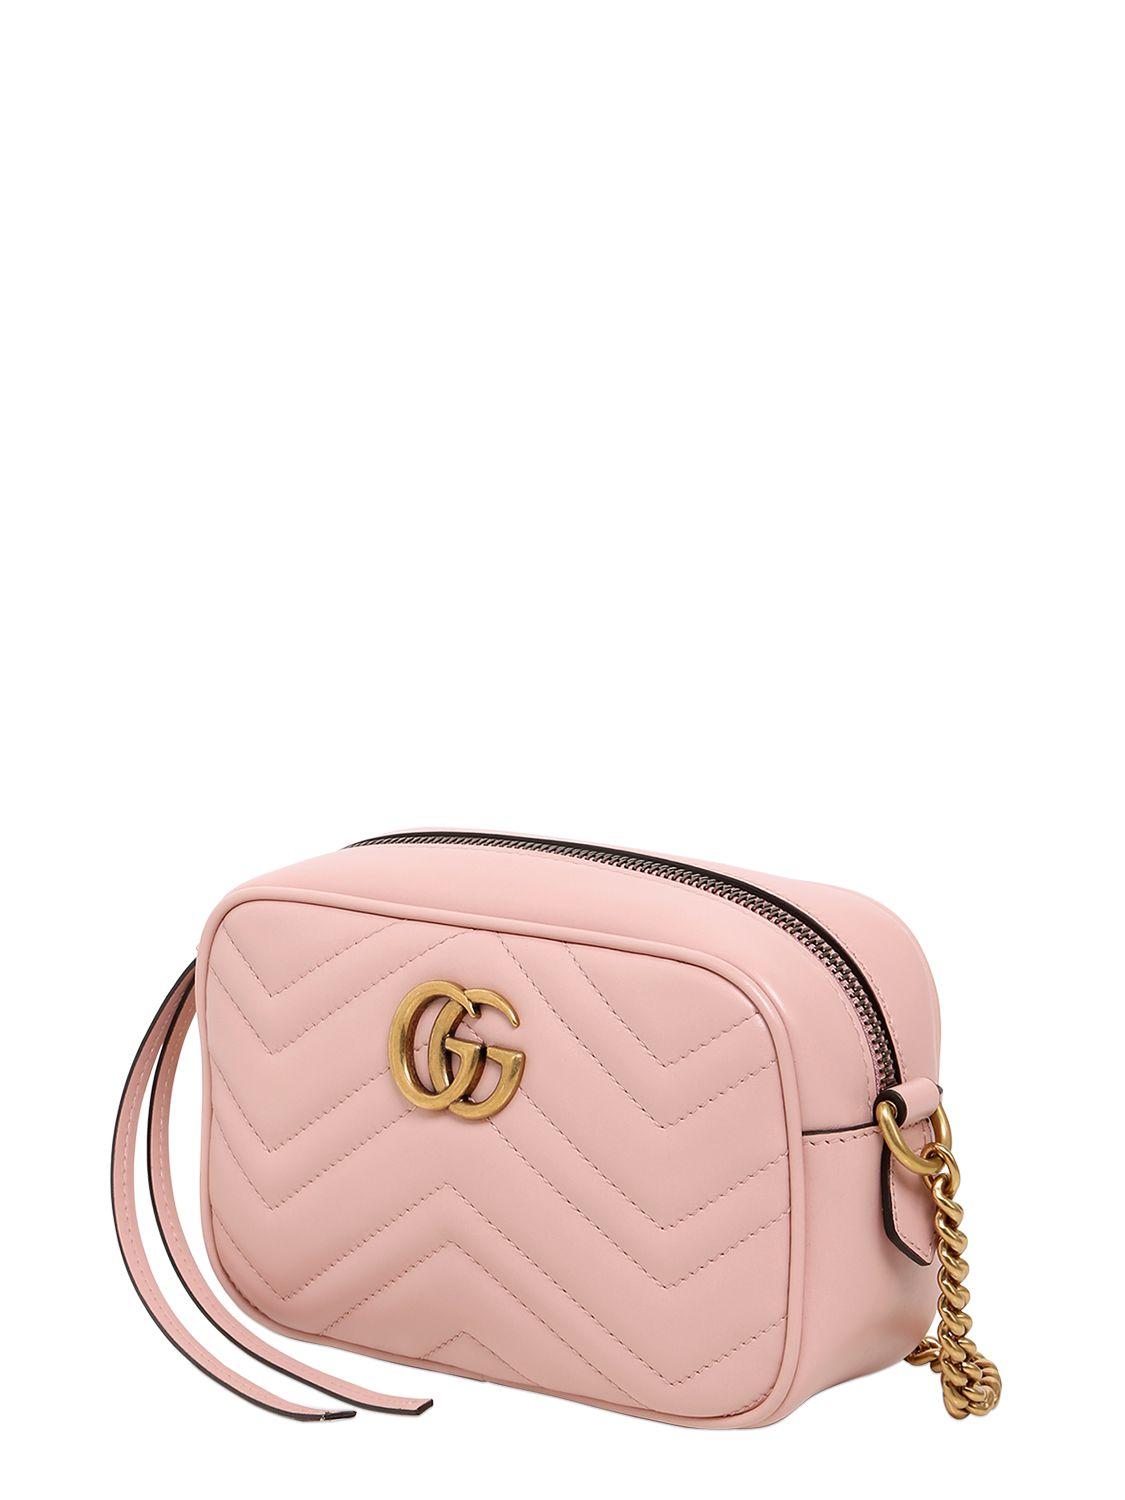 Gucci Mini Gg Marmont 2.0 Leather Bag in Light Pink (Pink) - Lyst